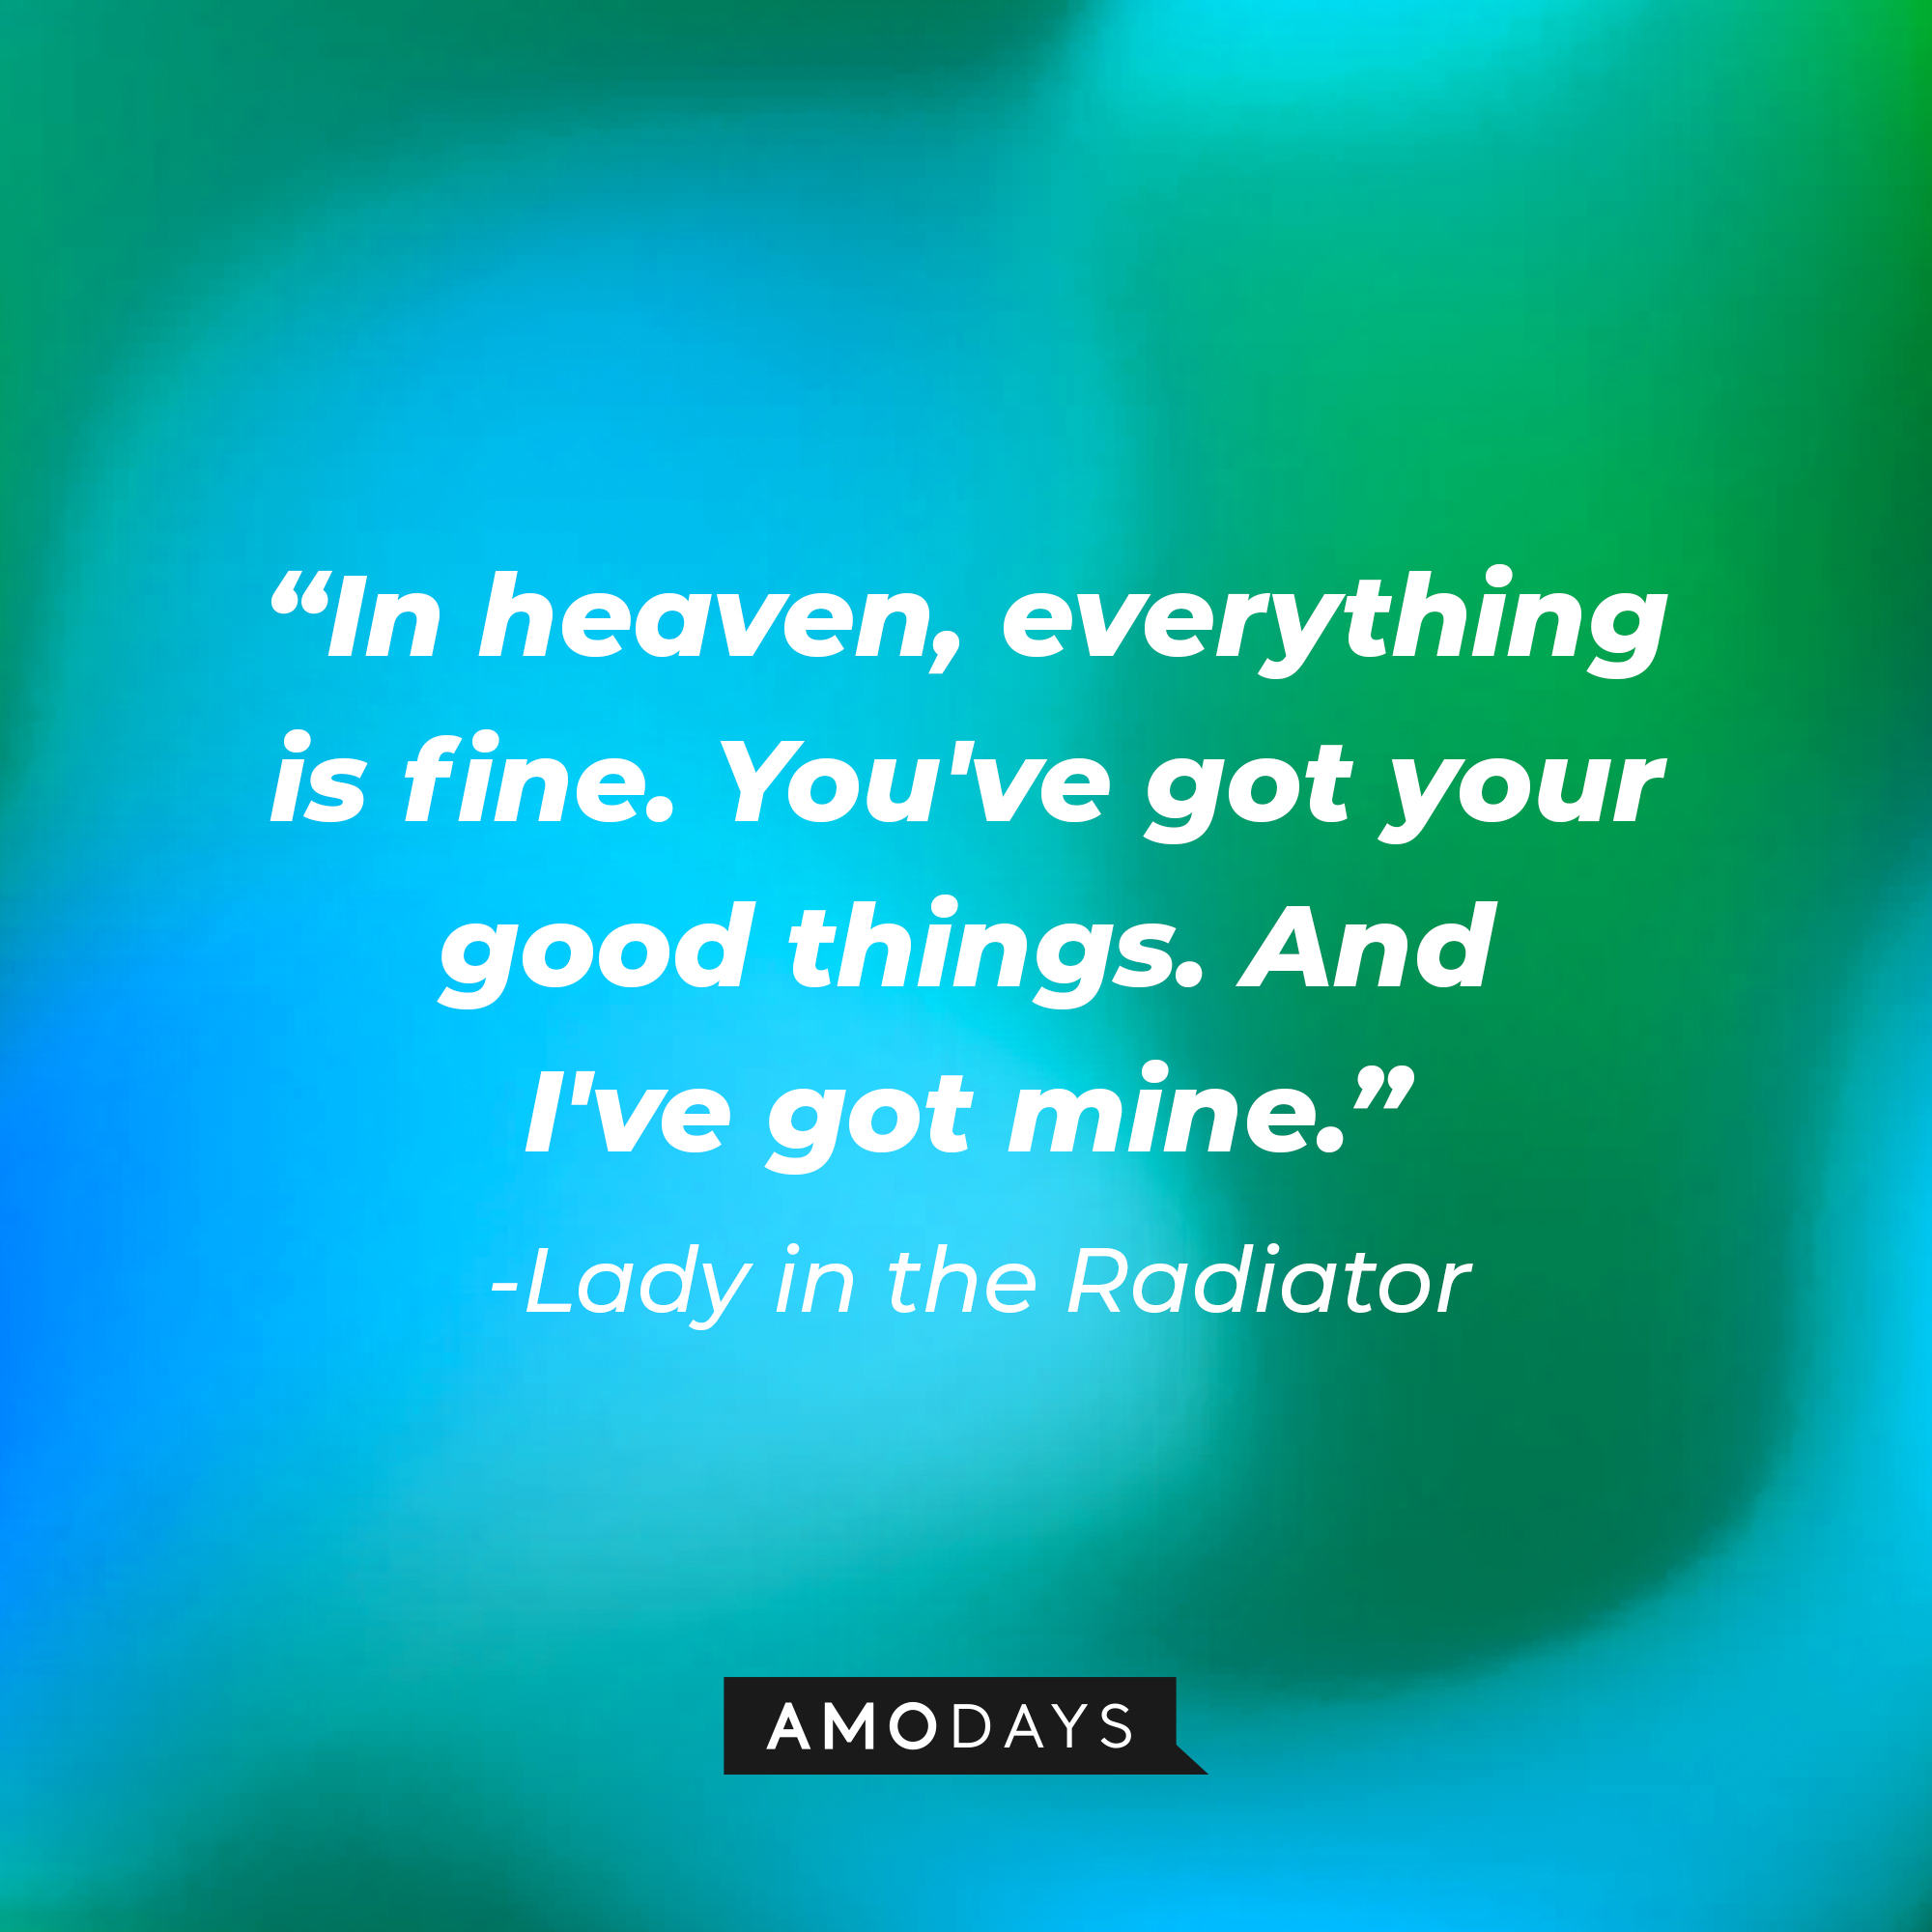 Lady in the Radiator’s quote: “In heaven, everything is fine. You've got your good things. And I've got mine.” | Source: AmoDays